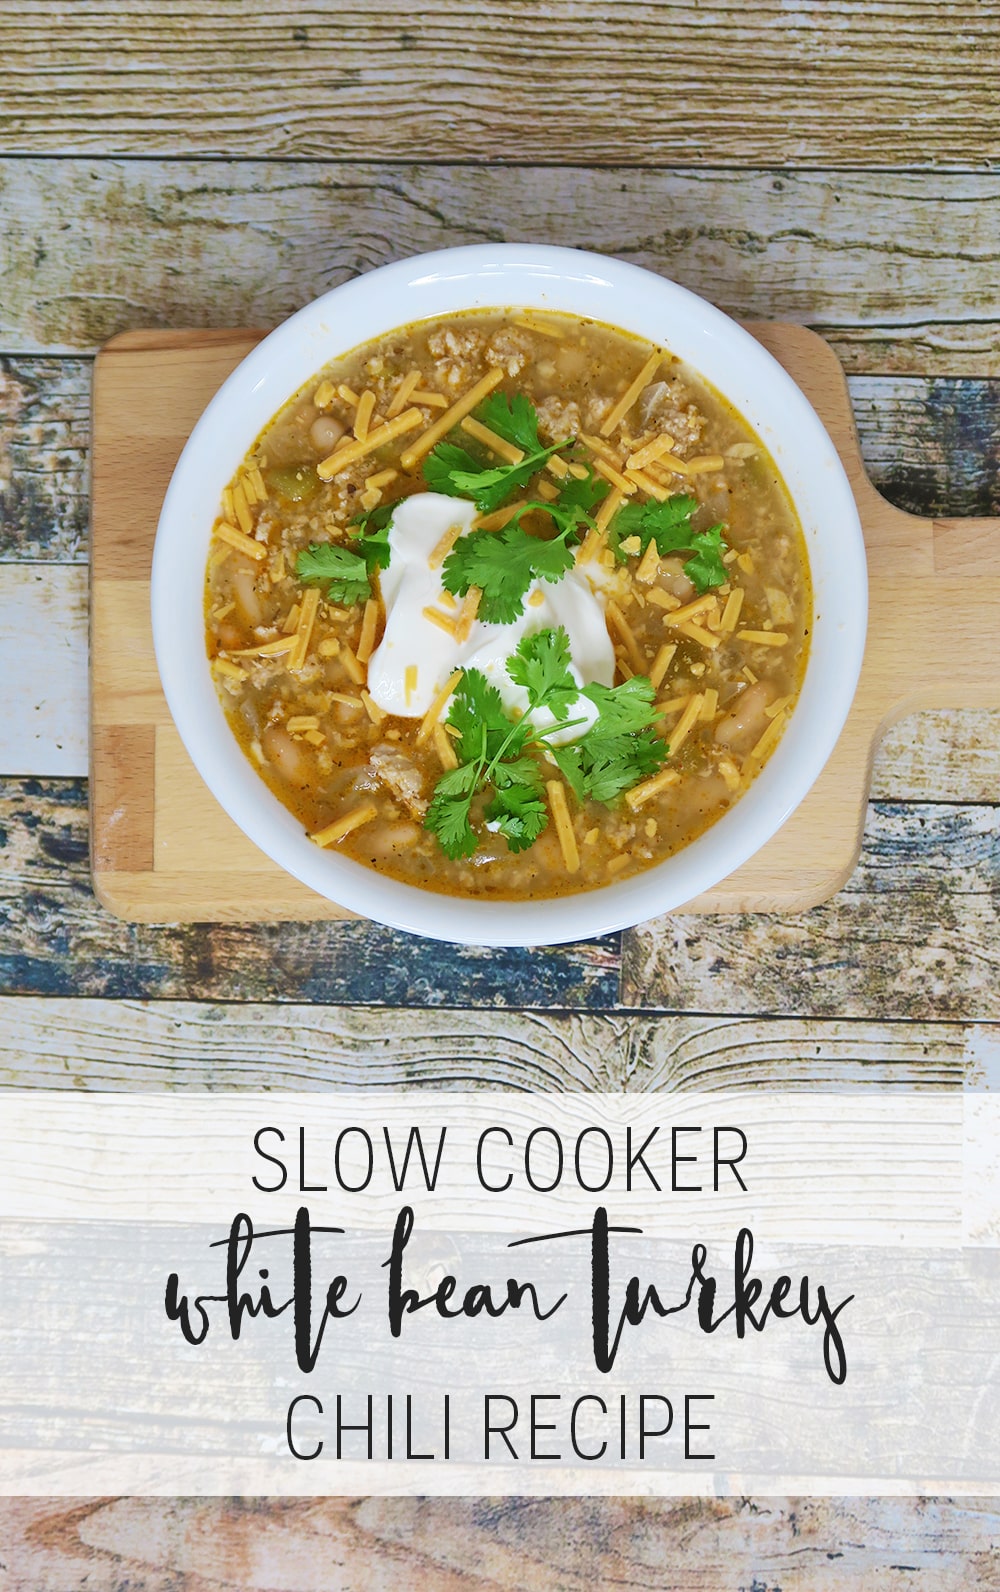 Need a hearty and healthy dish for the colder months? This Slow Cooker White Bean Turkey Chili recipe is super easy and ready in less than three hours!